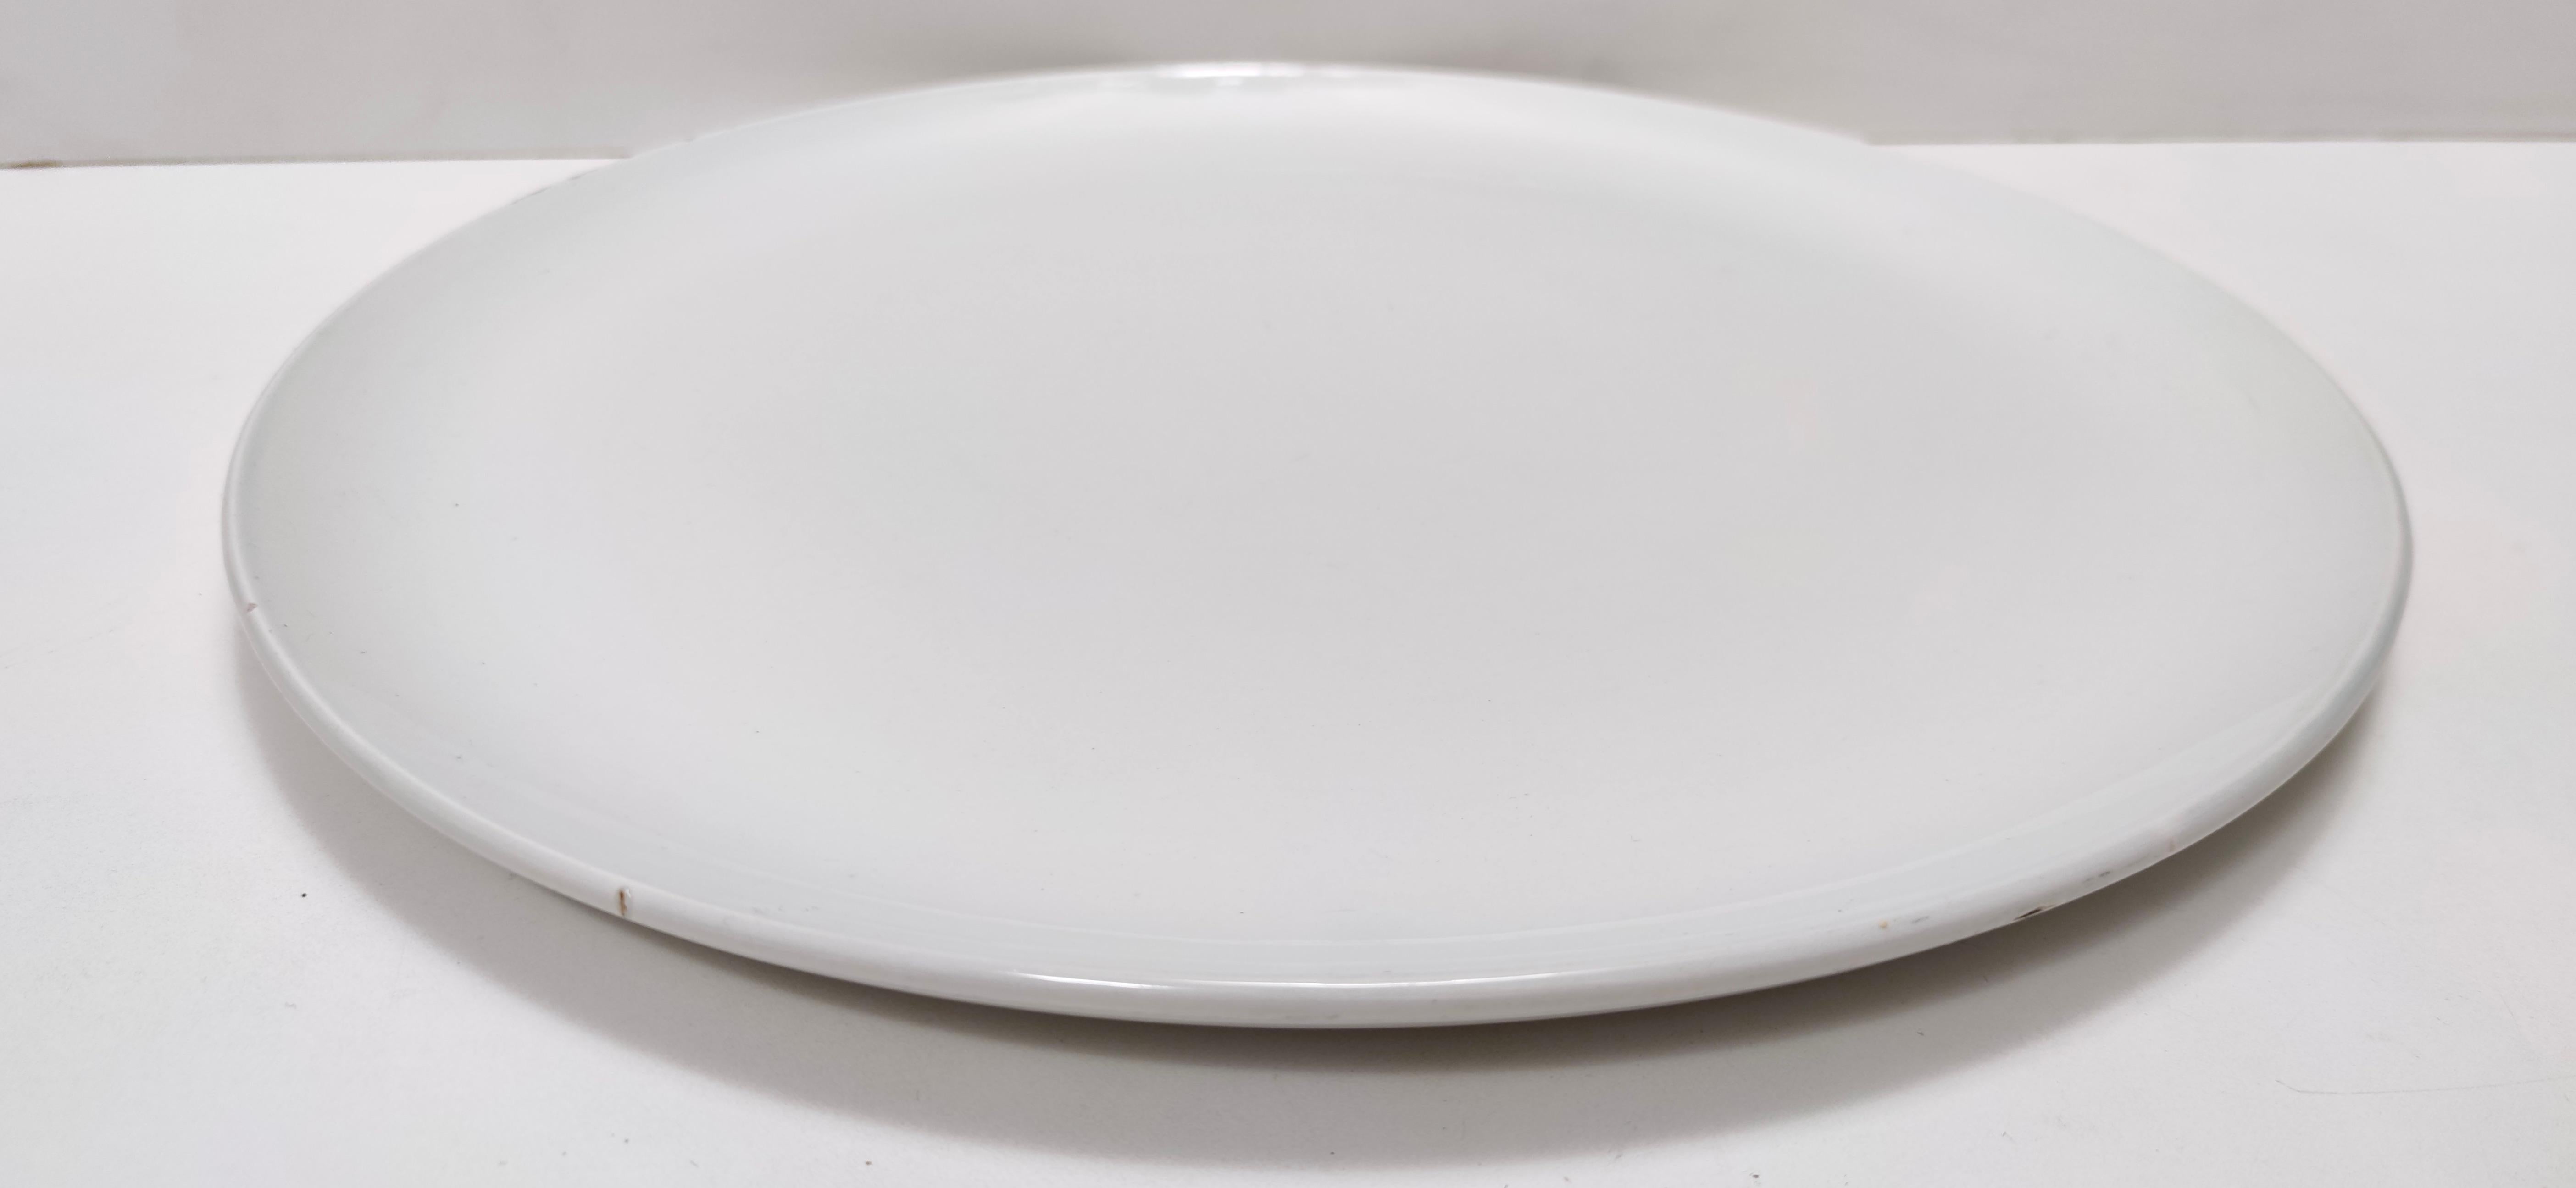 White Lacquered Ceramic Dessert Plate by Ginori Ascribable to Gio Ponti, Italy For Sale 2